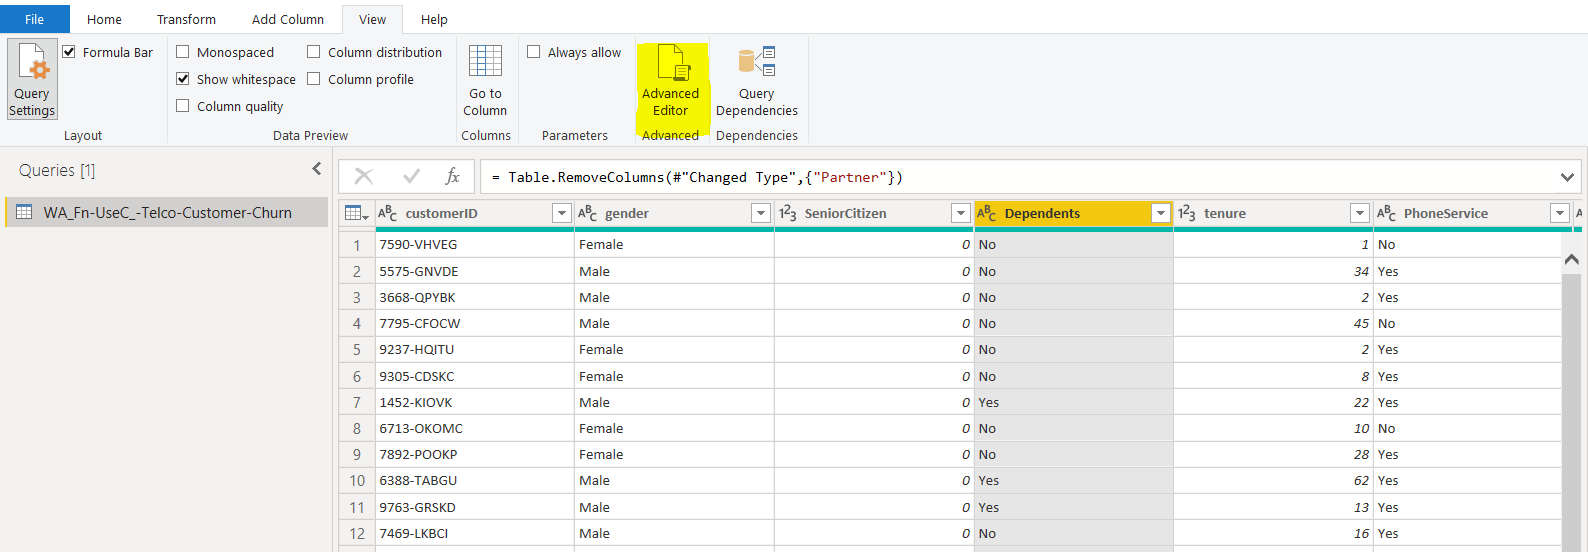 Using 'Advanced Editor' in Query Editor to show all M language queries.